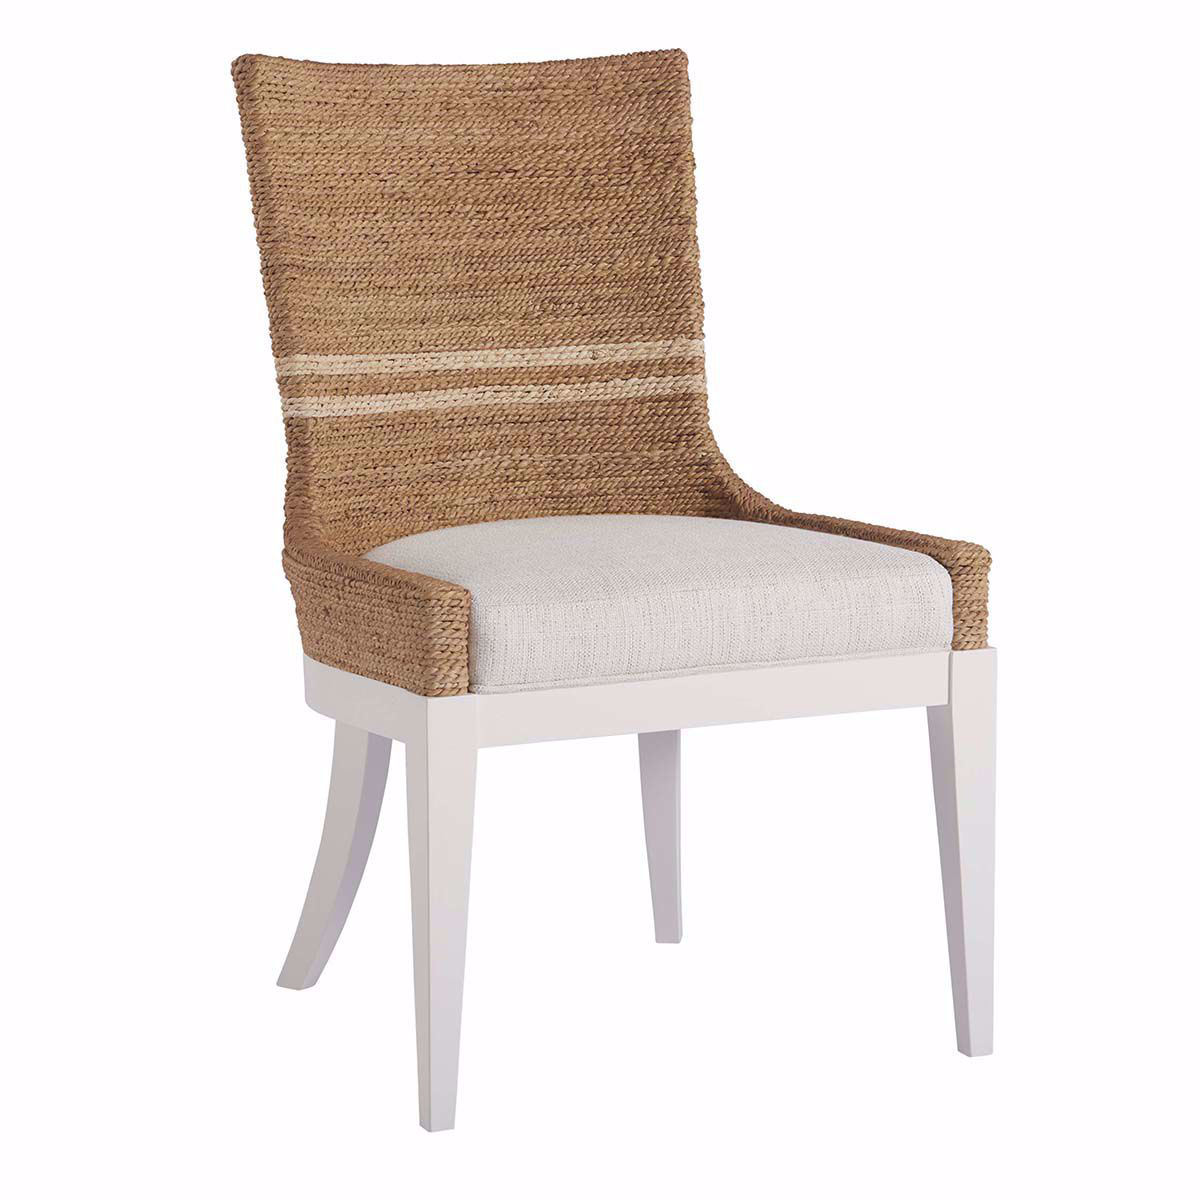 Picture of Siesta Key Dining Chair